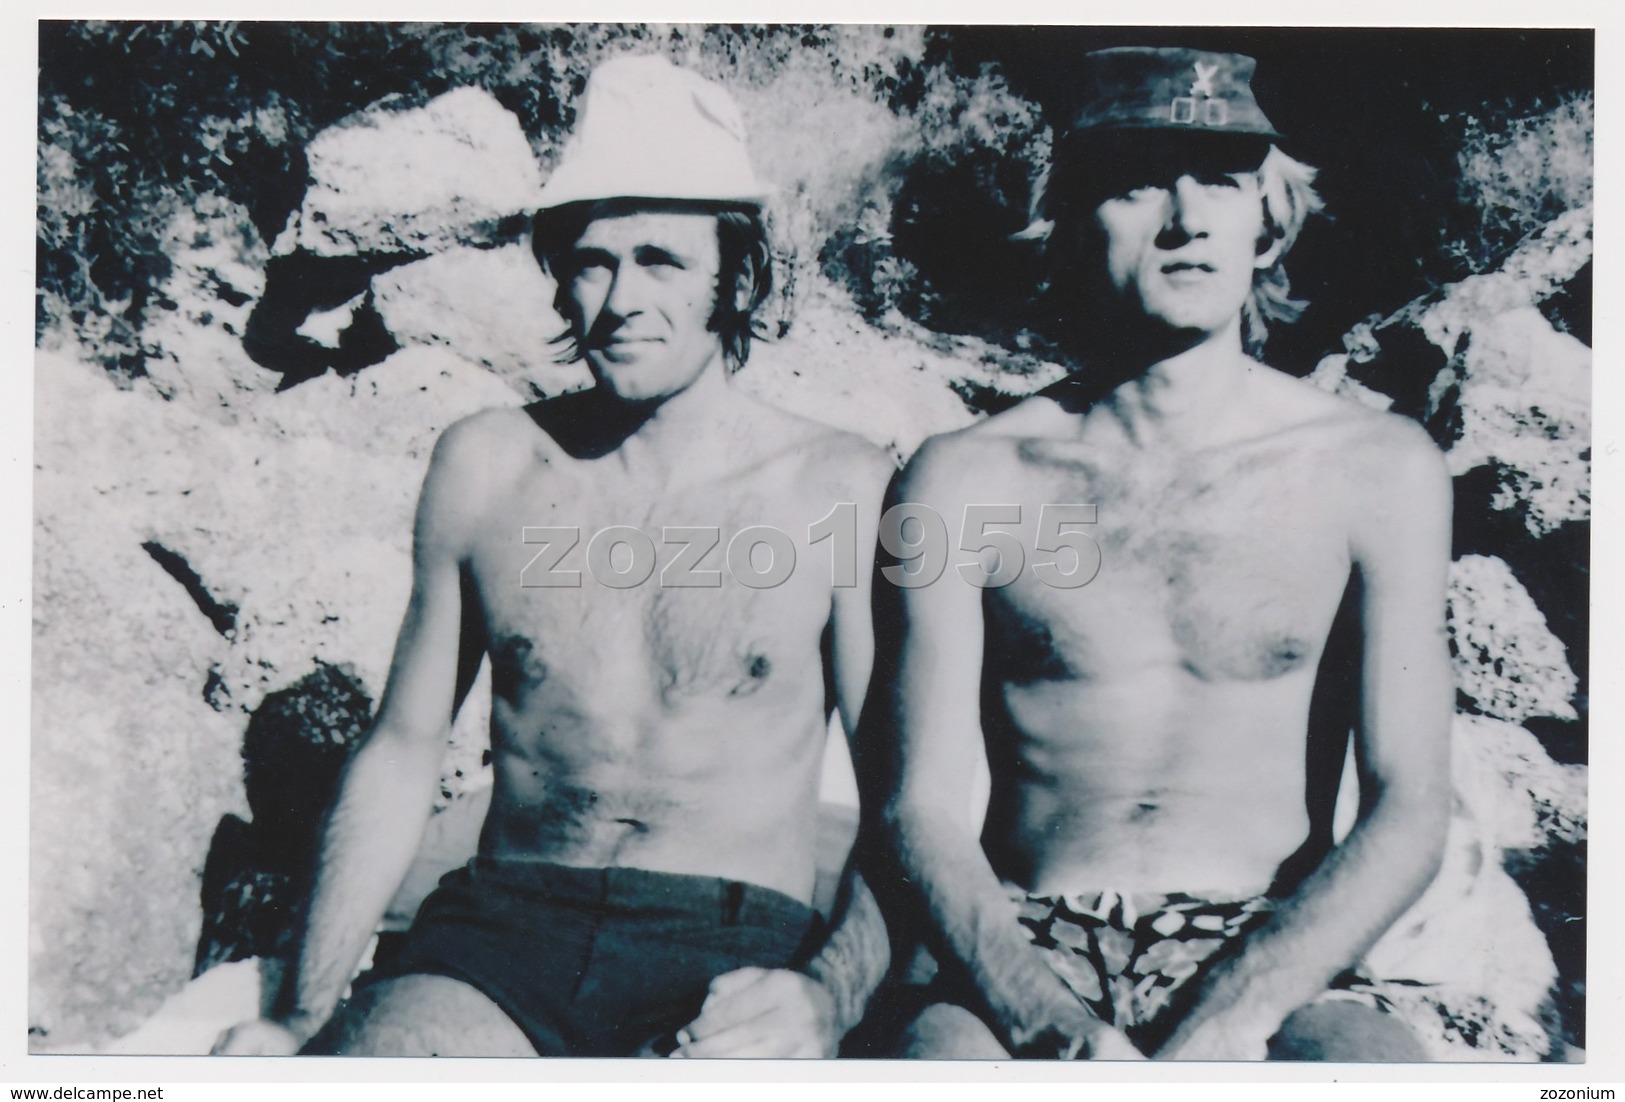 REPRINT - Two Naked Trunks Mucular Guys Men Sit On  Beach  Hommes Nus  Sur La Plage, Mecs, Photo Reproduction - Personas